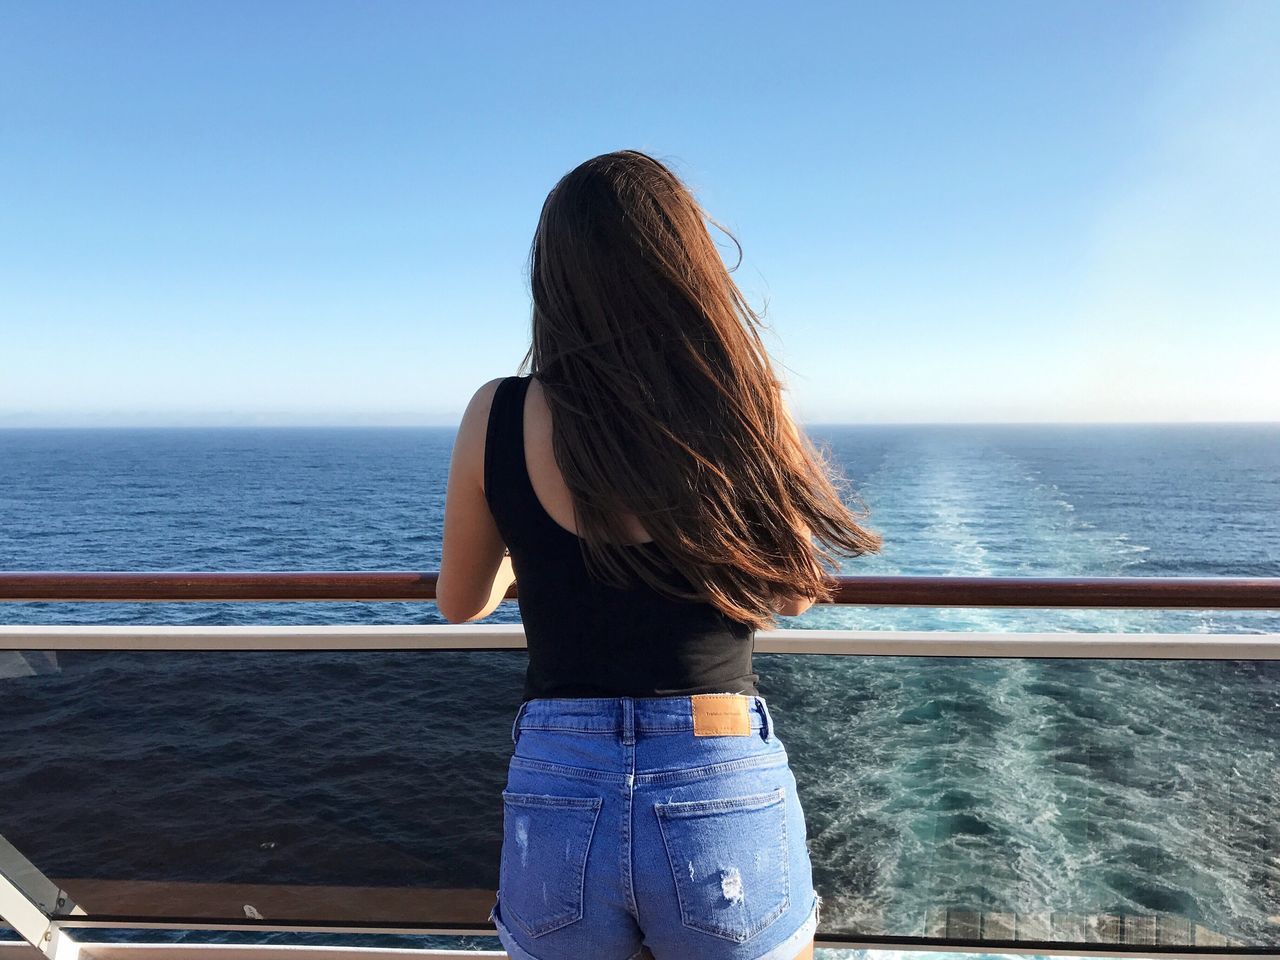 sea, horizon over water, water, one person, real people, rear view, nature, standing, leisure activity, scenics, long hair, clear sky, tranquility, beauty in nature, outdoors, day, lifestyles, blue, young adult, young women, women, sky, people